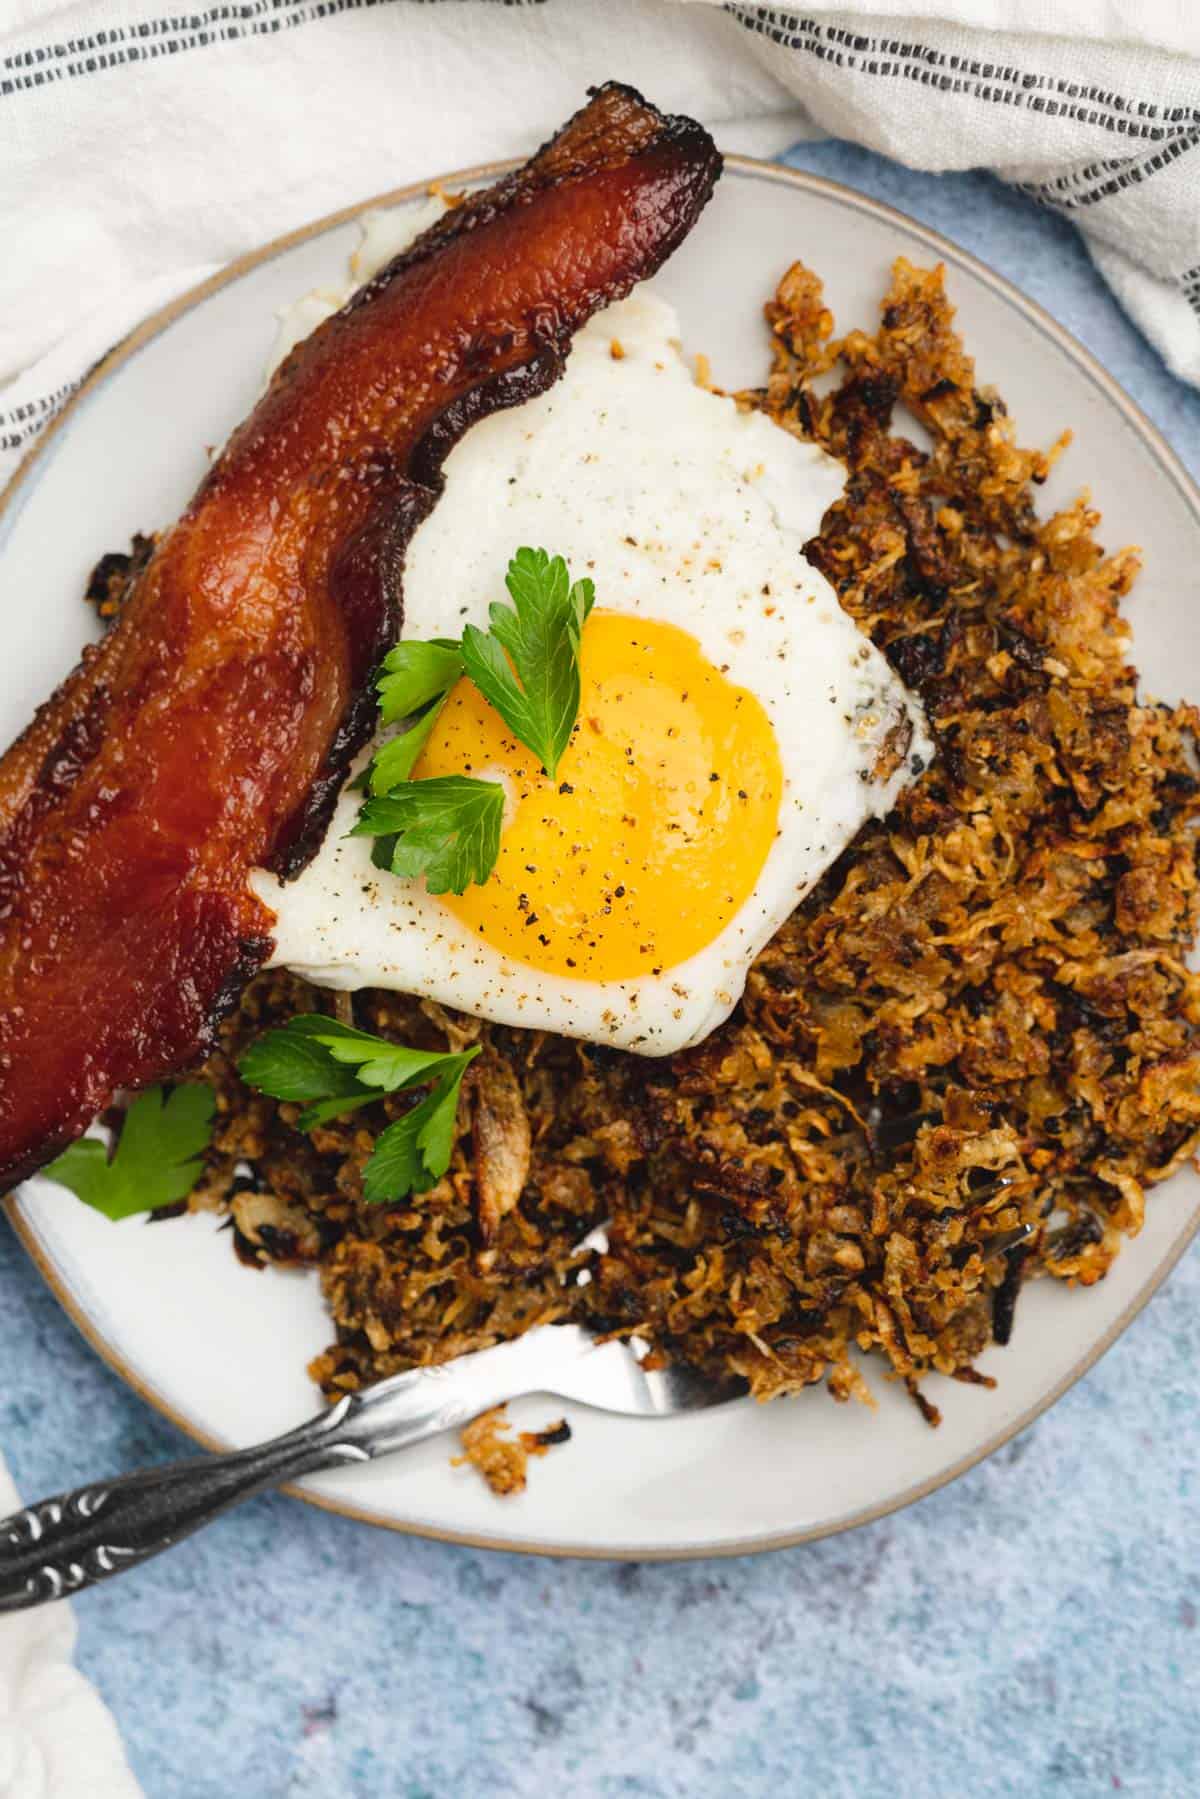 super crispy turnip hash browns with a sunny side up egg, bacon and parsley